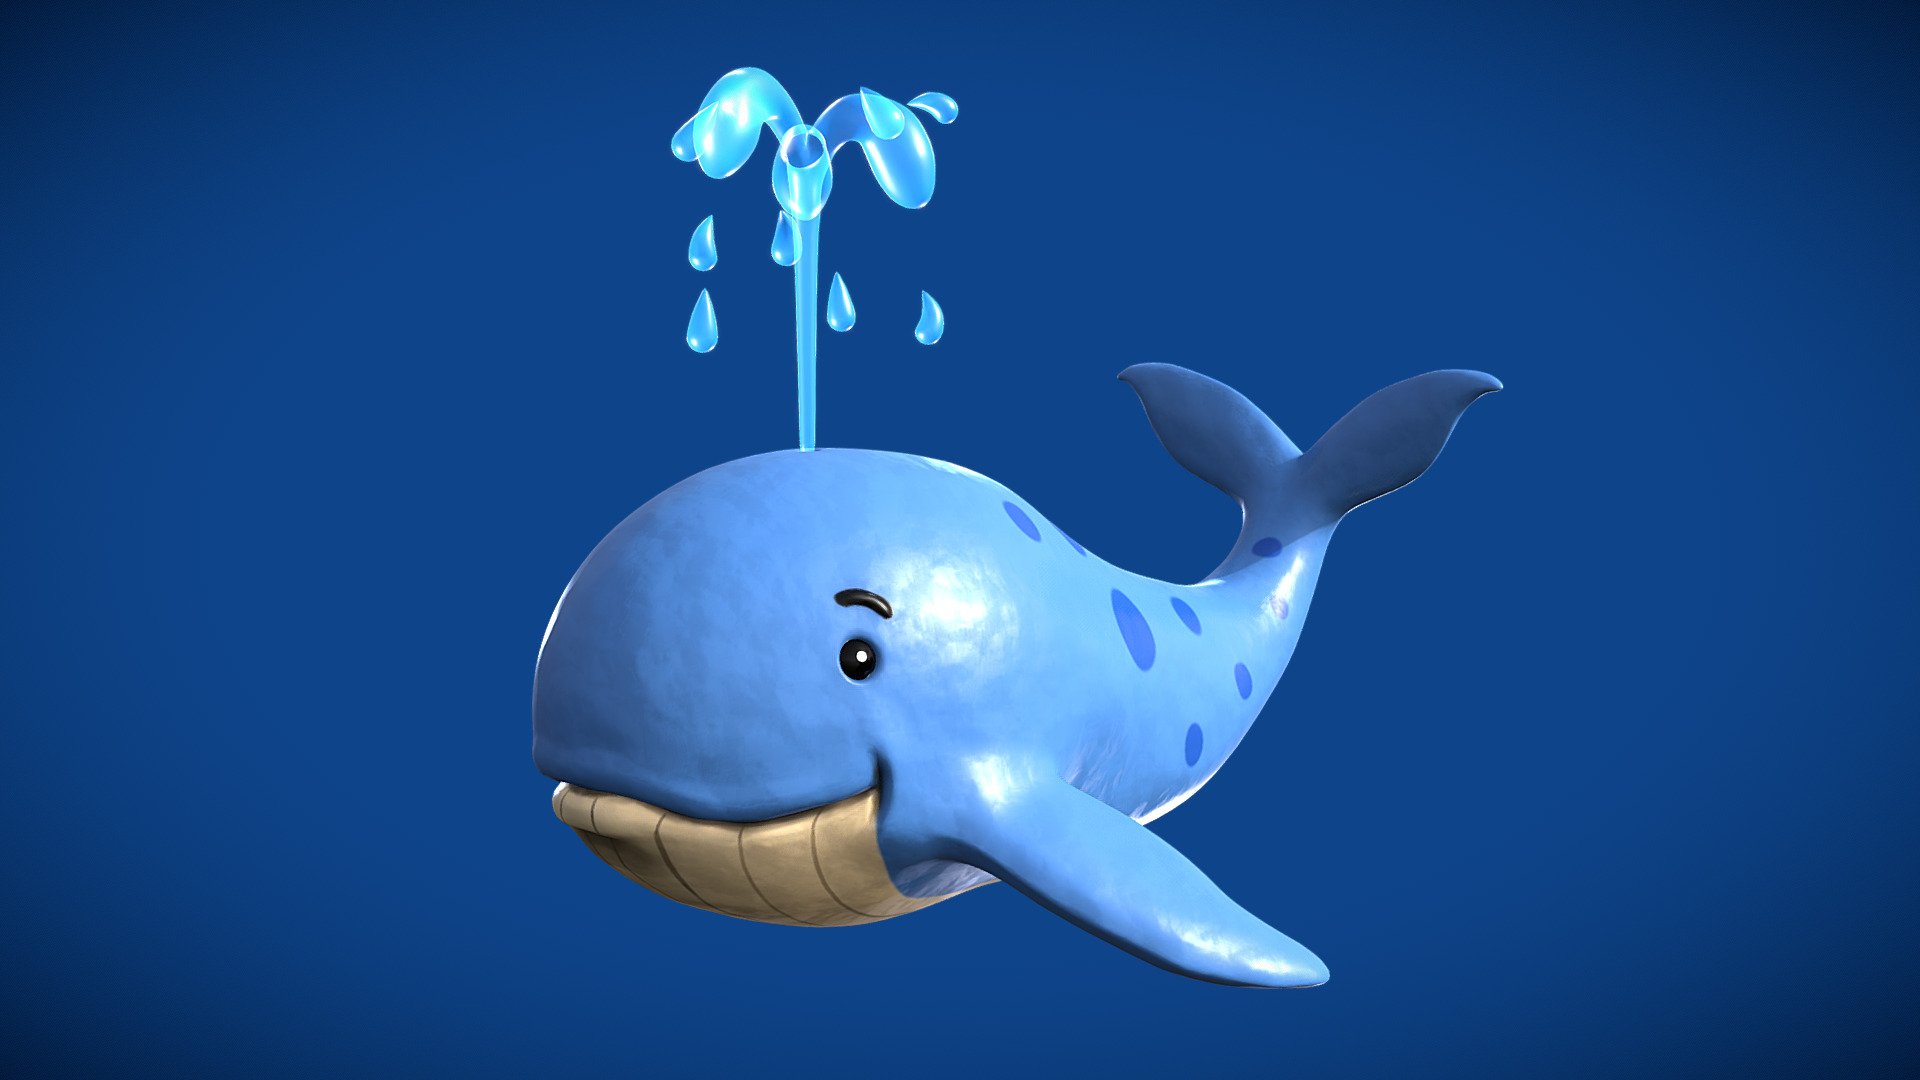 Stylized Cartoon Whale character, created with Blender and rendered in Eevee. This is the finished tutorial result of my Stylized Cartoon Whale tutorial series.   🐳

Check out the tutorial here:  https://youtu.be/RSRe7zsyWTw

Contents when purchased:




Stylized Cartoon Whale Blender File 

2 Final Renders

Whale Color And Normal Maps

HDRI Lighting

Note: This 3d character is not retopologized or rigged.

 - Stylized Cartoon Whale 🐳 - Buy Royalty Free 3D model by Ryan King Art (@ryankingart) 3d model